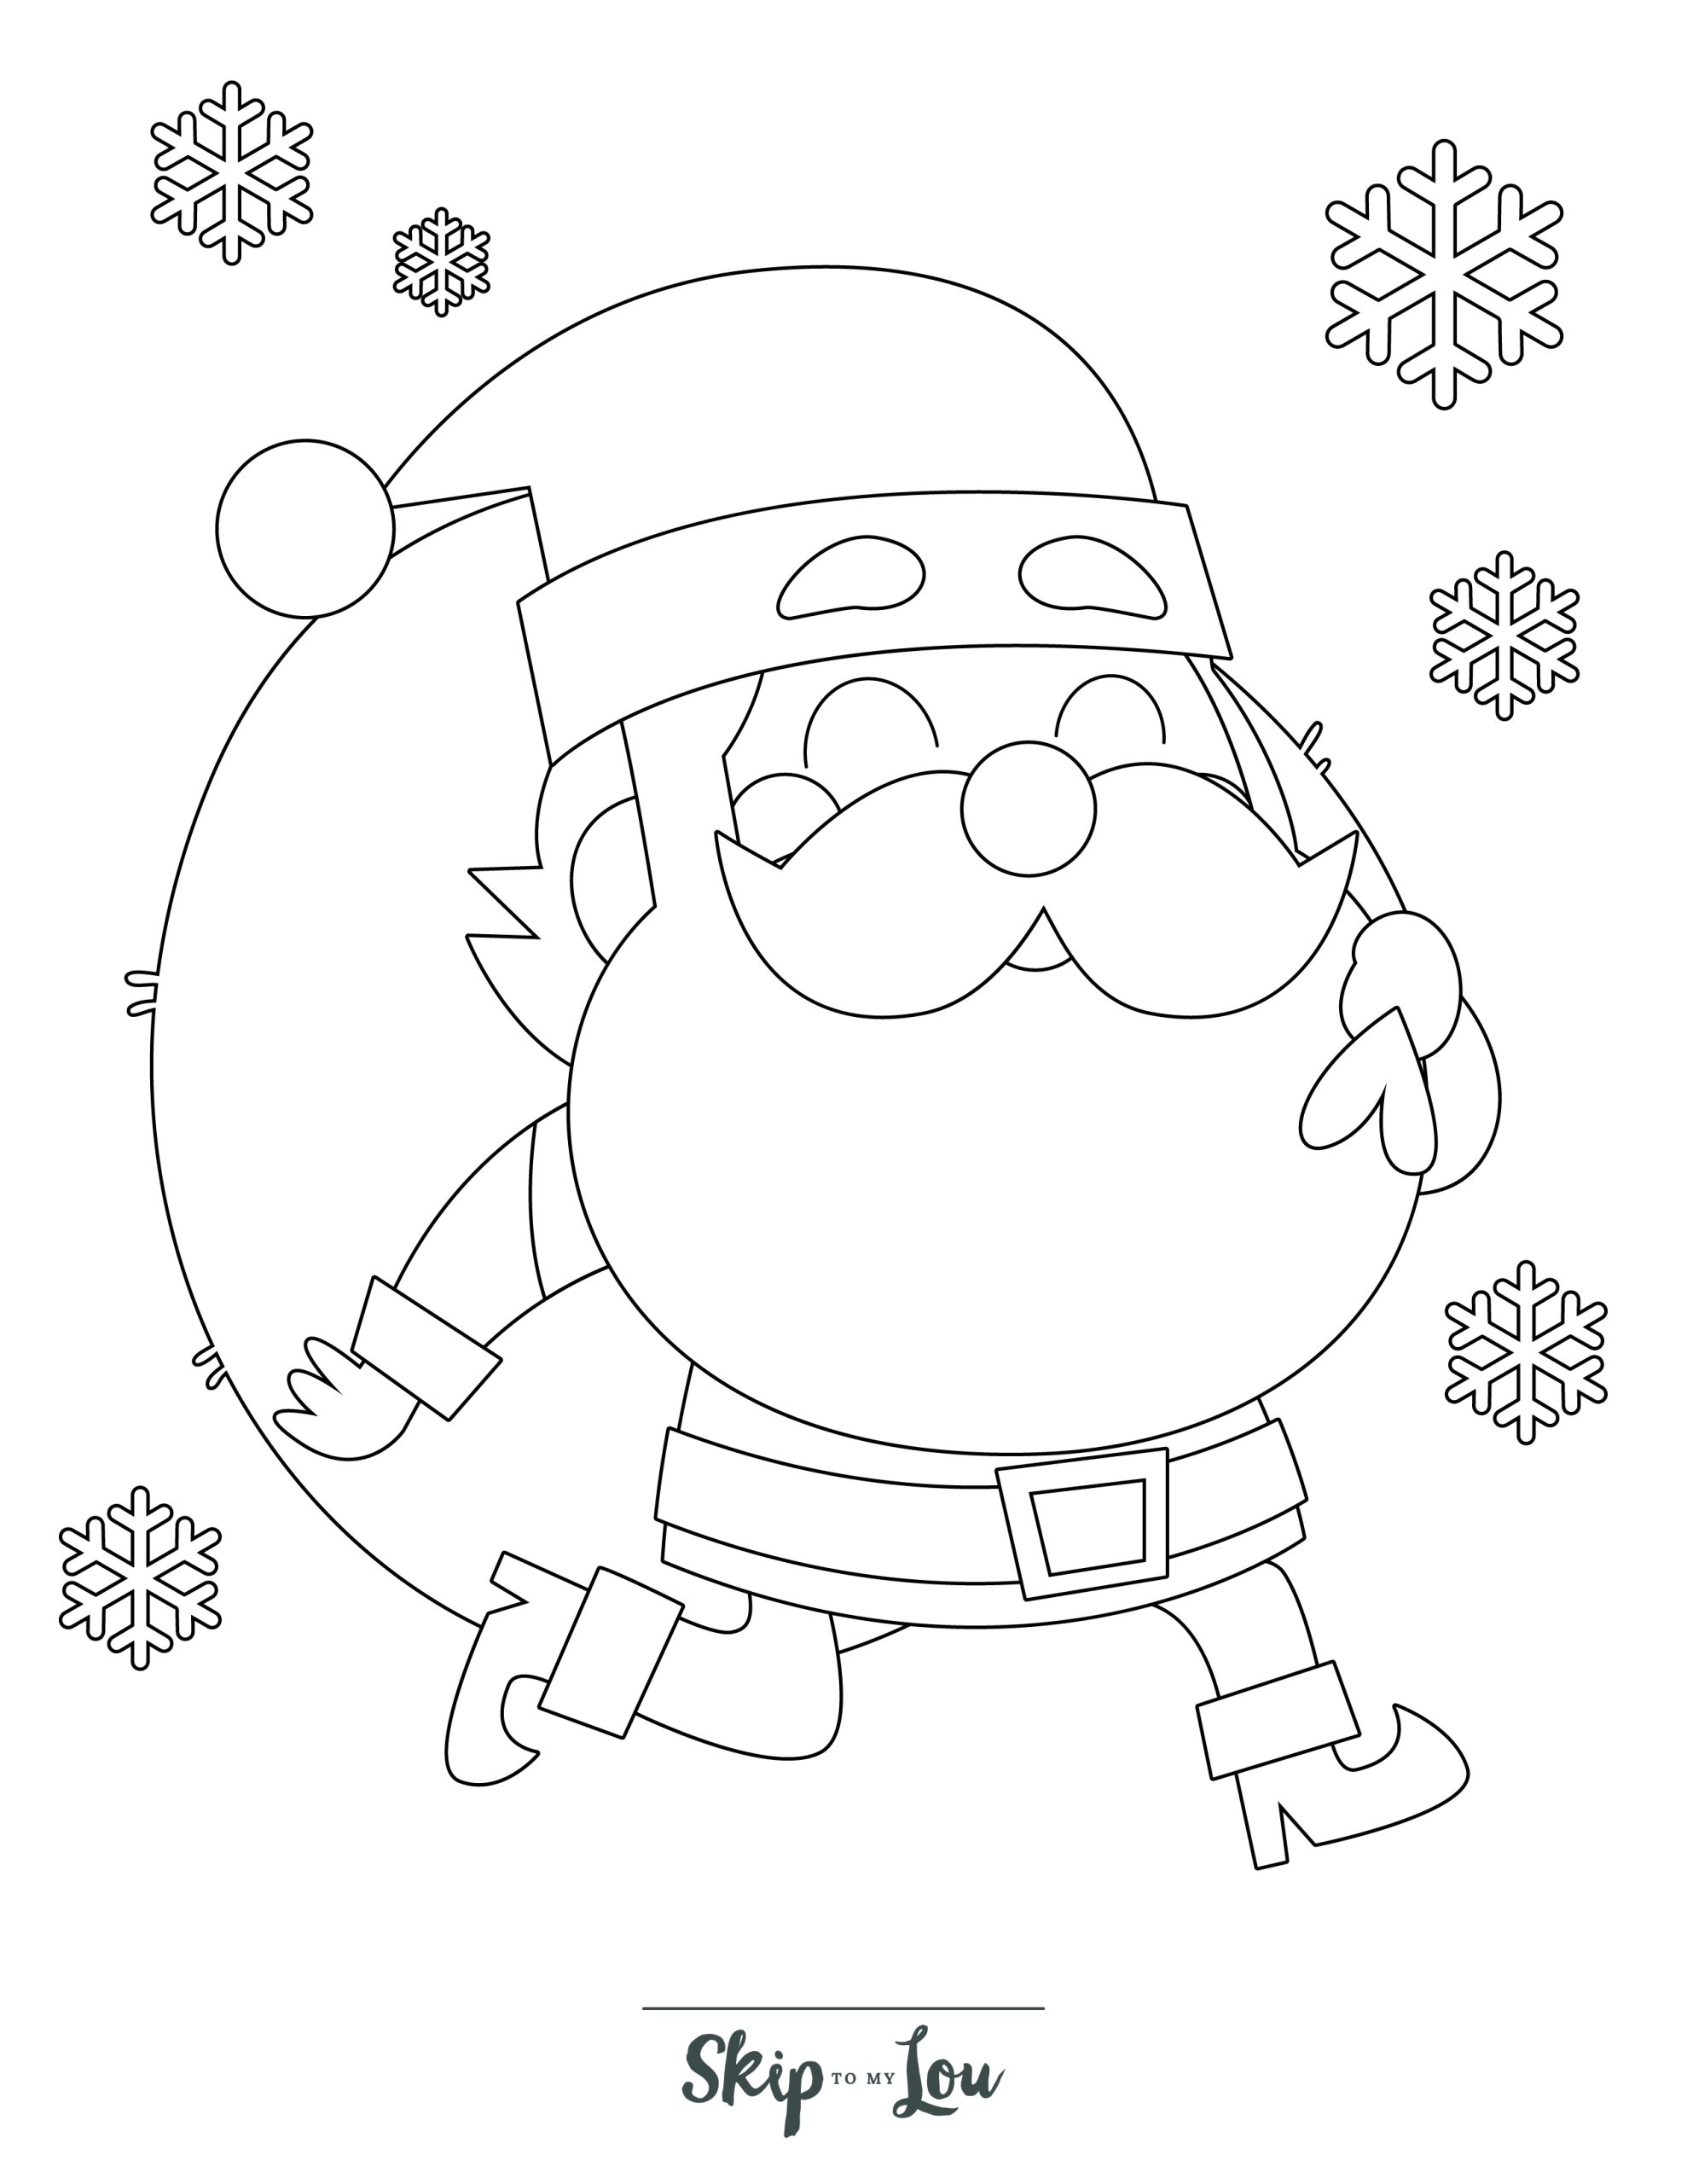 Holiday Coloring Page 11 - Line drawing of a little santa holding a big bag